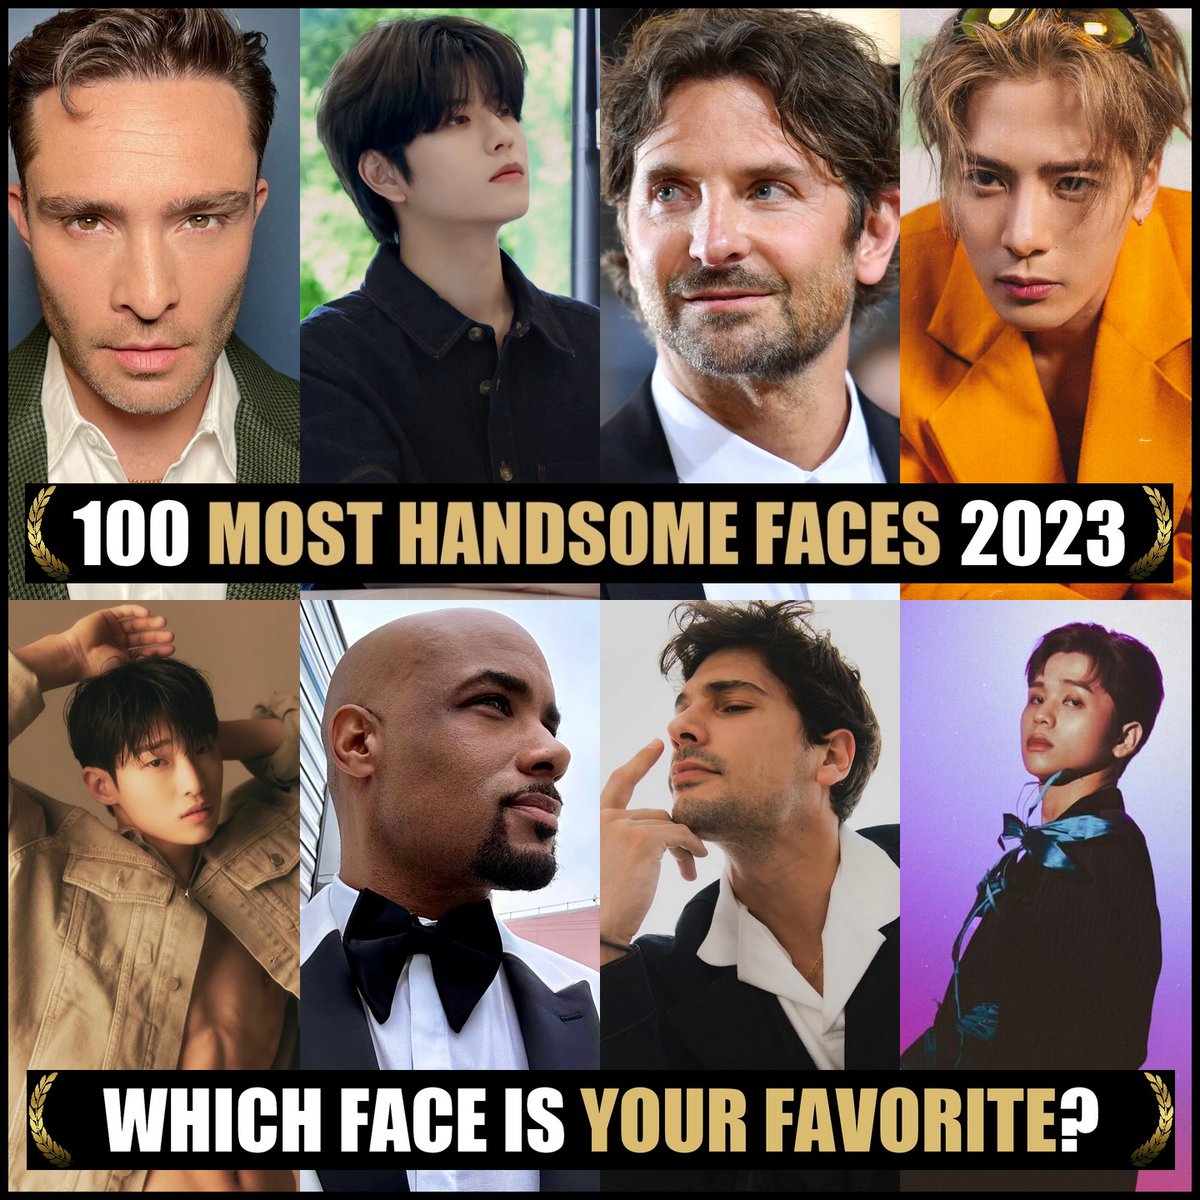 Nominations: 100 Most Handsome Faces 2023. Congrats! Would you like to nominate & vote? Please join our Patreon (Link in Bio) #TCCandler #100faces2023 #edwestwick #Seungmin #StrayKids #bradleycooper #JacksonWang #GOT7 #kanhyeonbae #DenizCanAktaş #vinci #HORI7ON #boriskodjoe